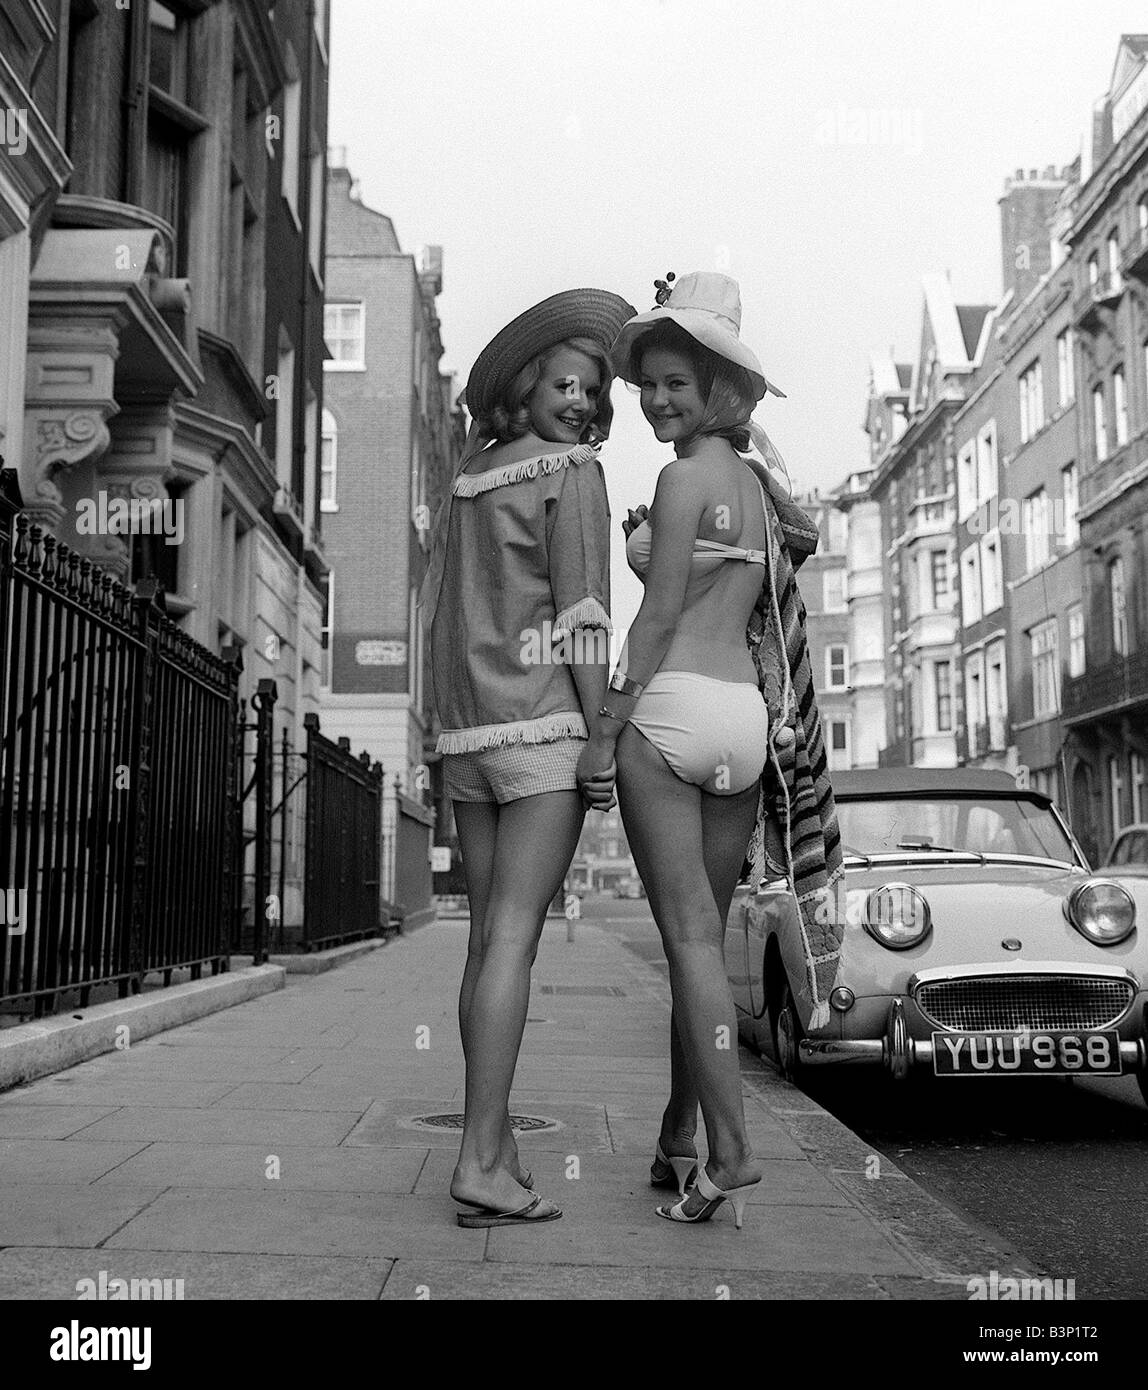 Clothing October 1961 LEFT Annabel Maufe 19 rehearses with RIGHT Judy Edwards 16 for the end of term fashion show at The Charm Show for would be models in Welbeck Street London Annabel Pictured wearing canvas navy top with white fringe and pink and white gingham shorts topped with a gigi hat Judy Pictured wearing two piece bikini and floppy hat Stock Photo